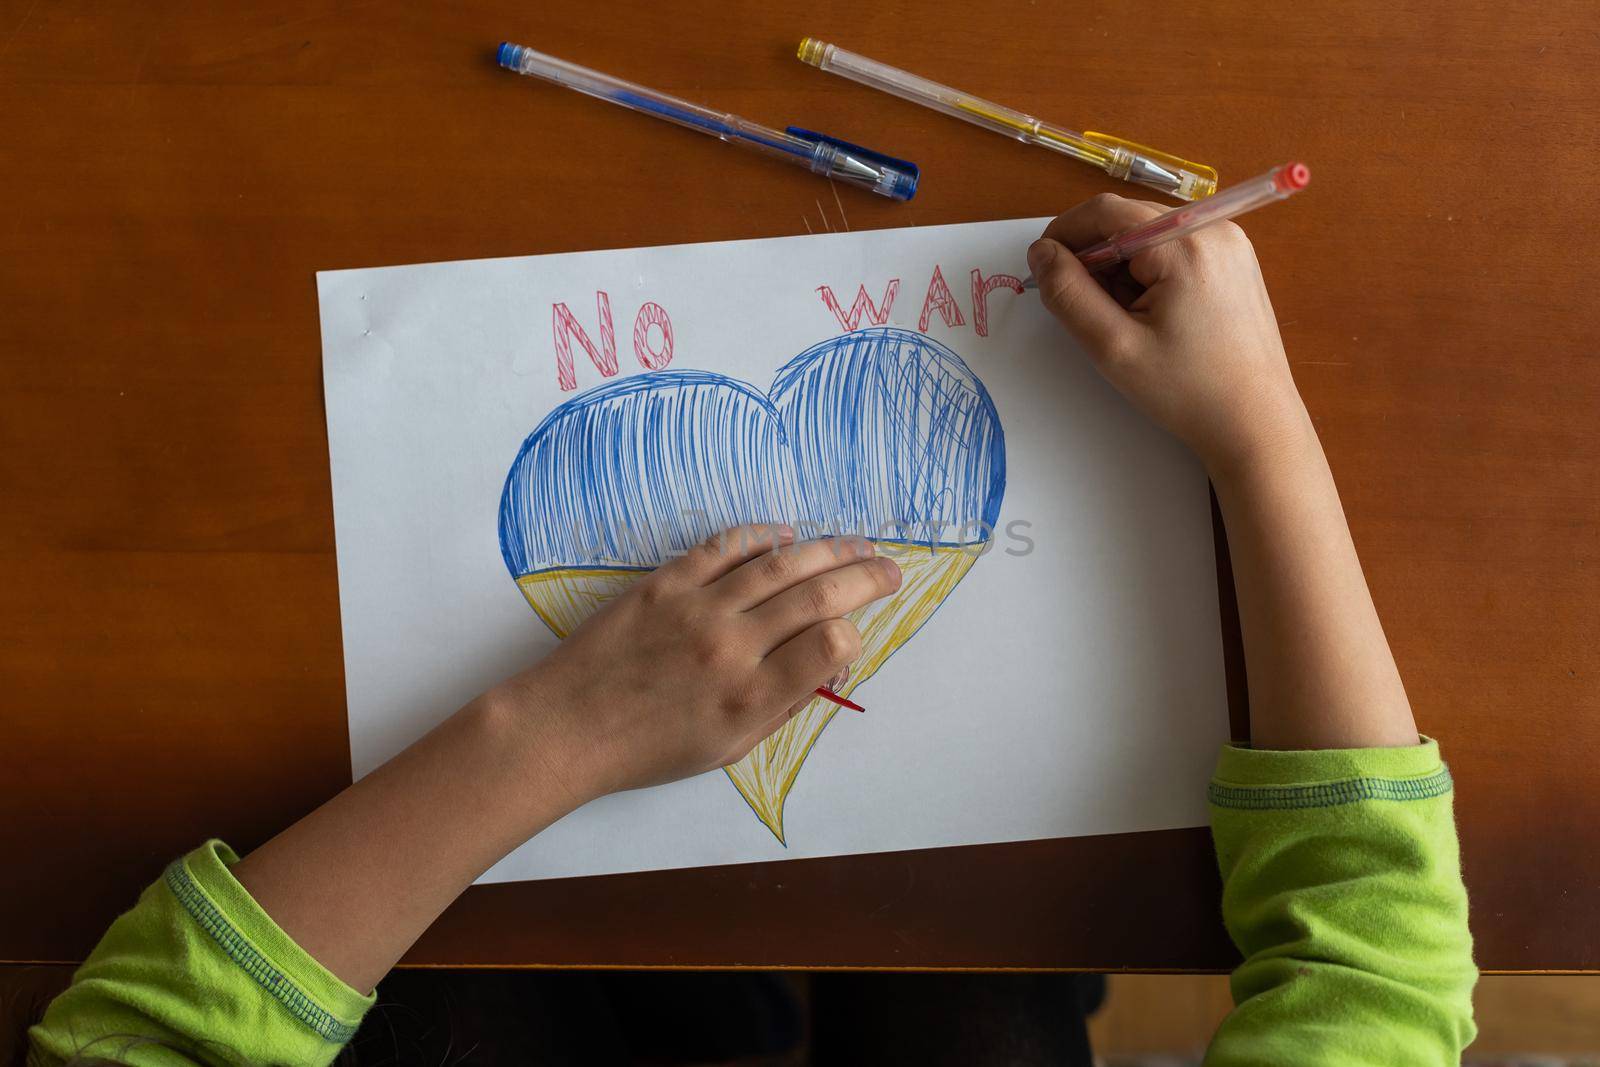 Ukrainian flag and a heart in yellow and blue color. Child draws a heart on the blackboard.